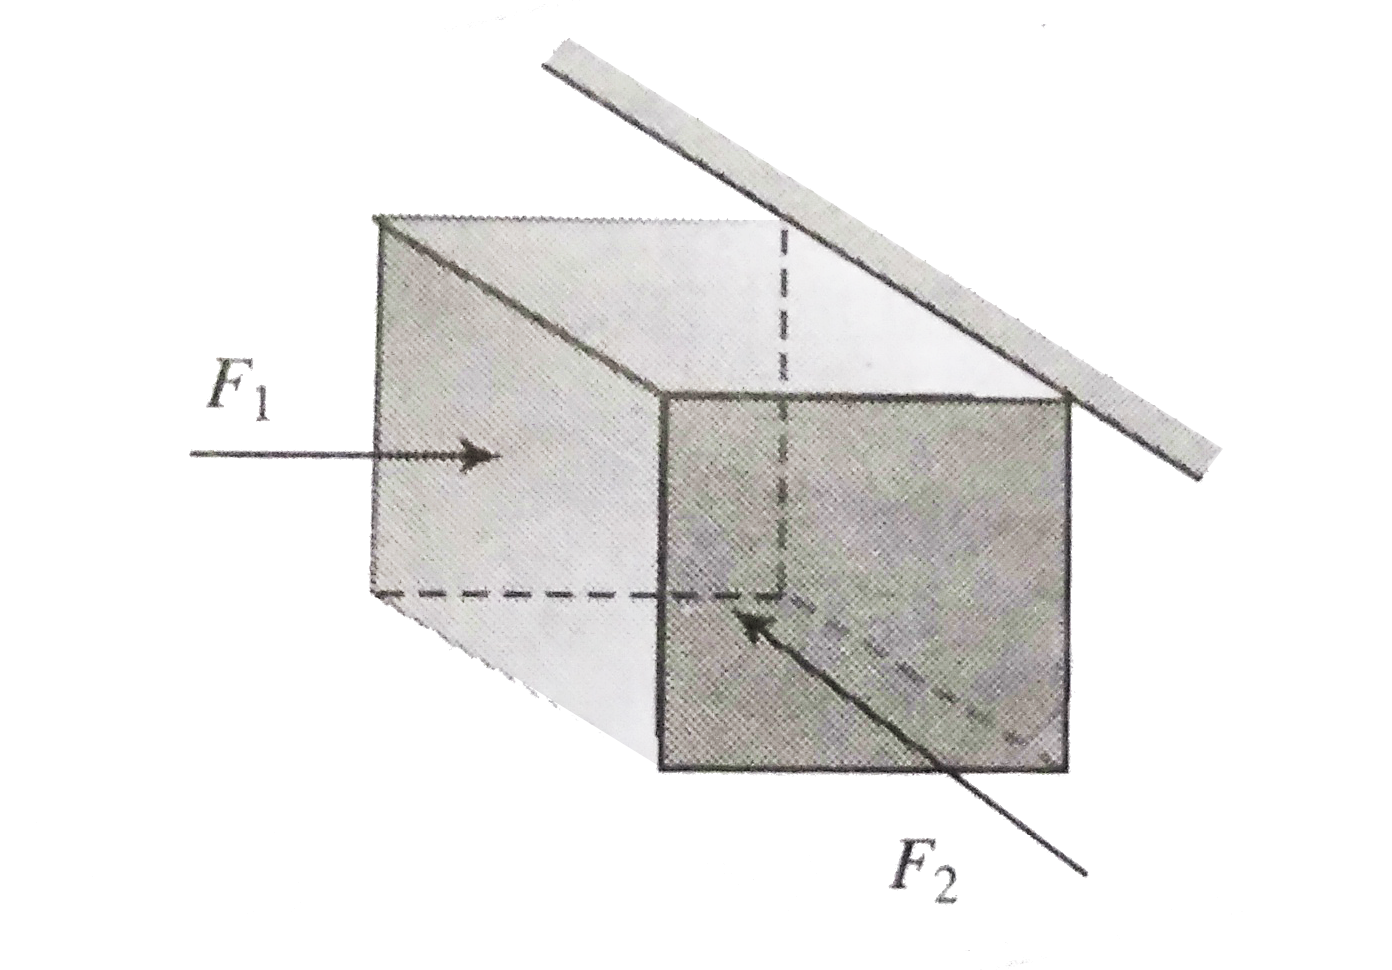 A block of mass 4kg pressed againest a rought wall by two perpendicular horizontal forces F(1) and F(2)as shown in figure Coefficient of static friction between the block and wall is 0.6 and that of kinetic friction is 0.5    For F(1) = 300 N and F(2) = 100 N find the direction and magnitude of friction force acting on the block